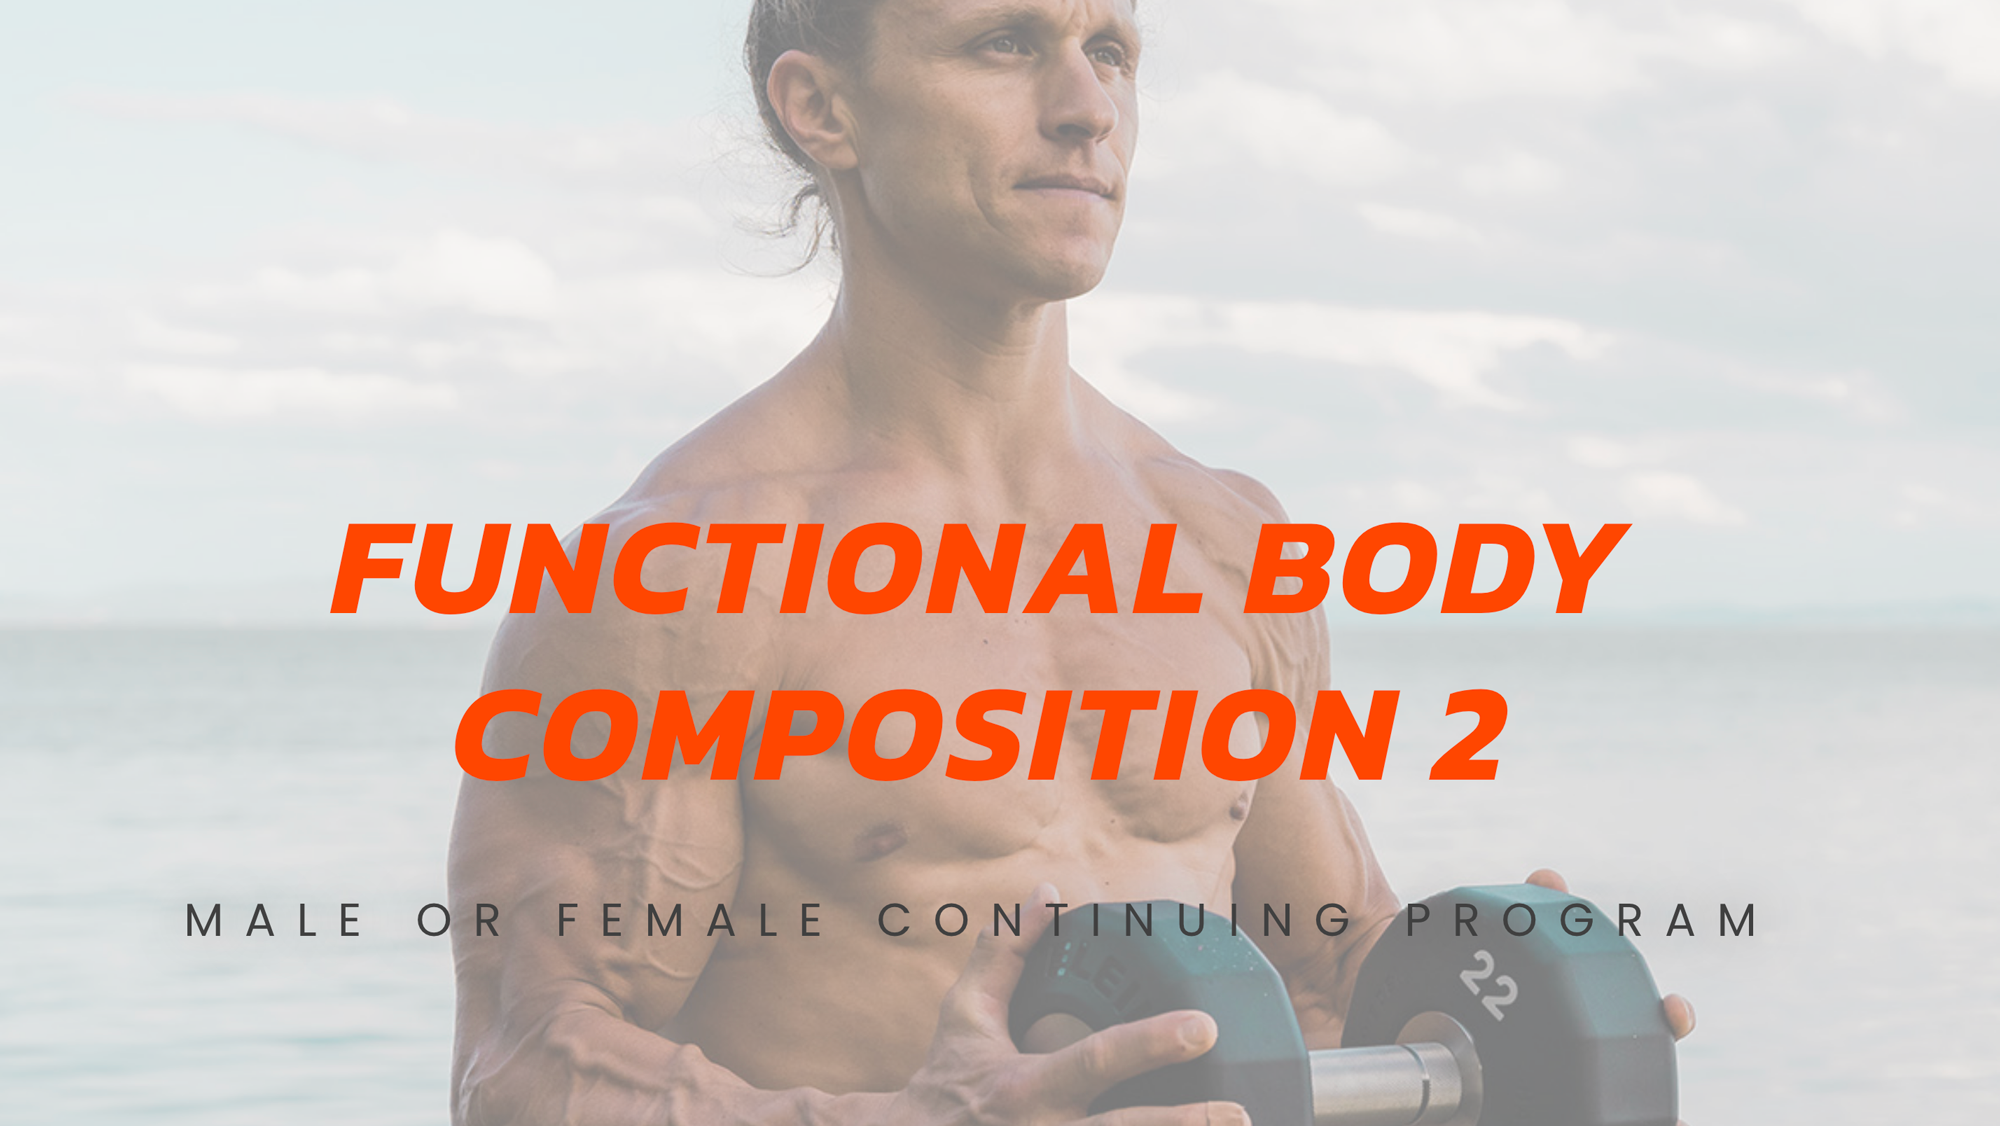 Functional Bodybuilding - Functional Body Composition 2 - Male Edition